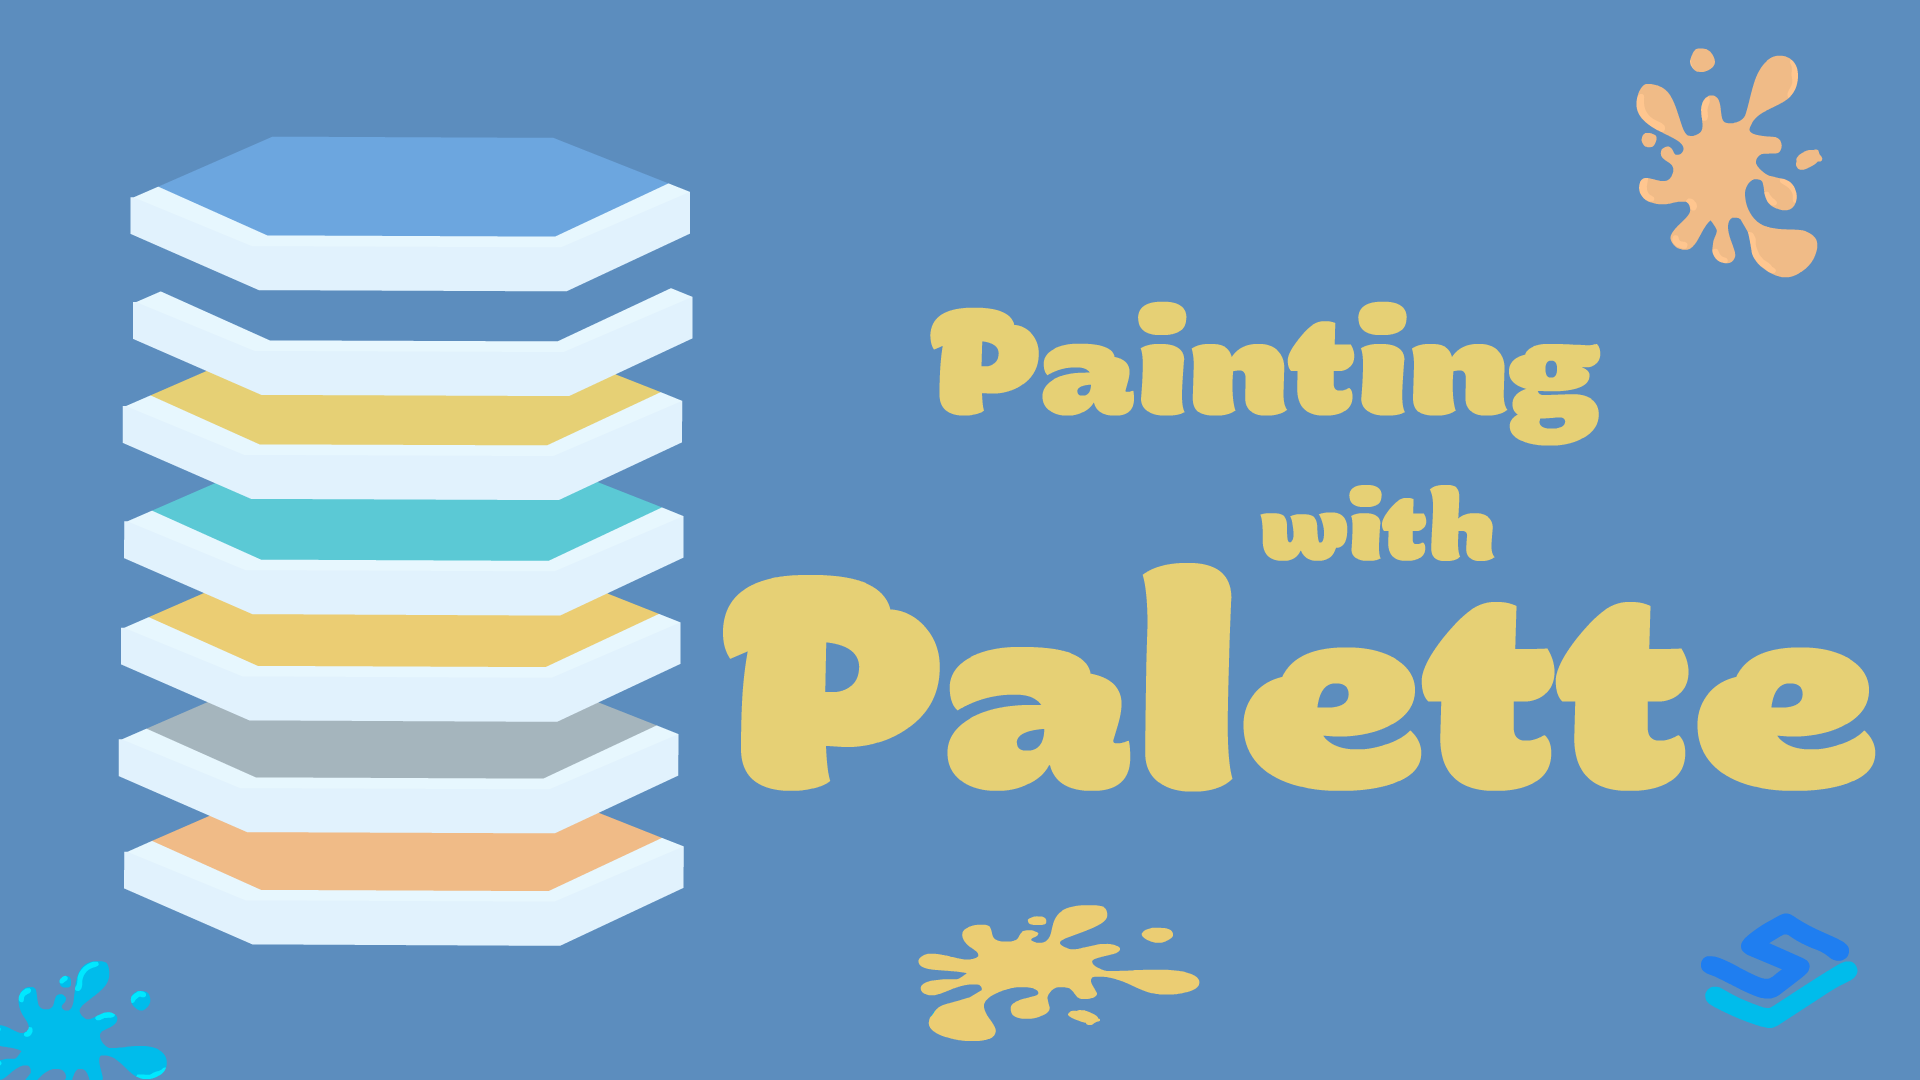 Painting with Palette